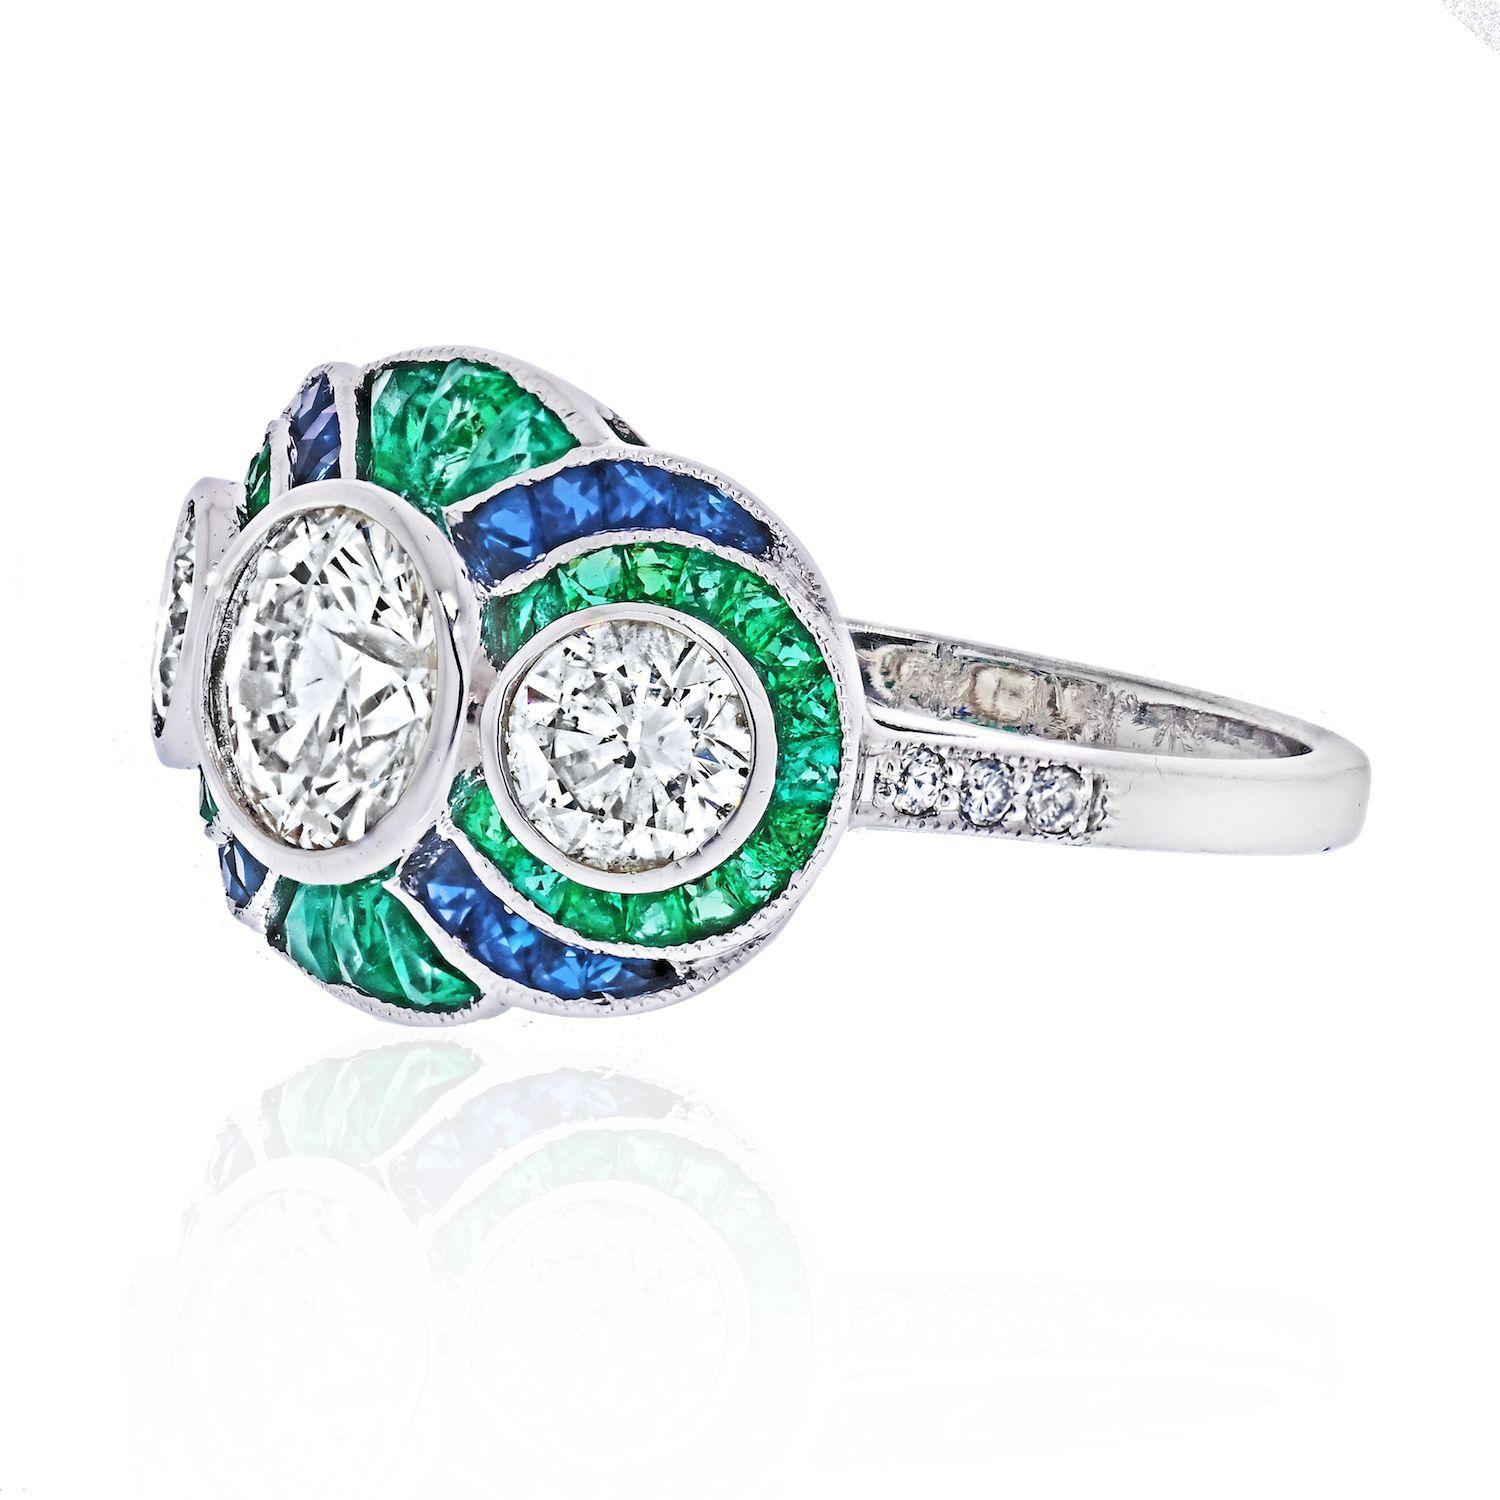 What a lovely three stone diamond engagement ring adorned by sapphires, and green emeralds. This is a newly made but quite vintage looking ring, that was crafted in platinum. Three round cut diamonds are bezel set in the center creating a classic